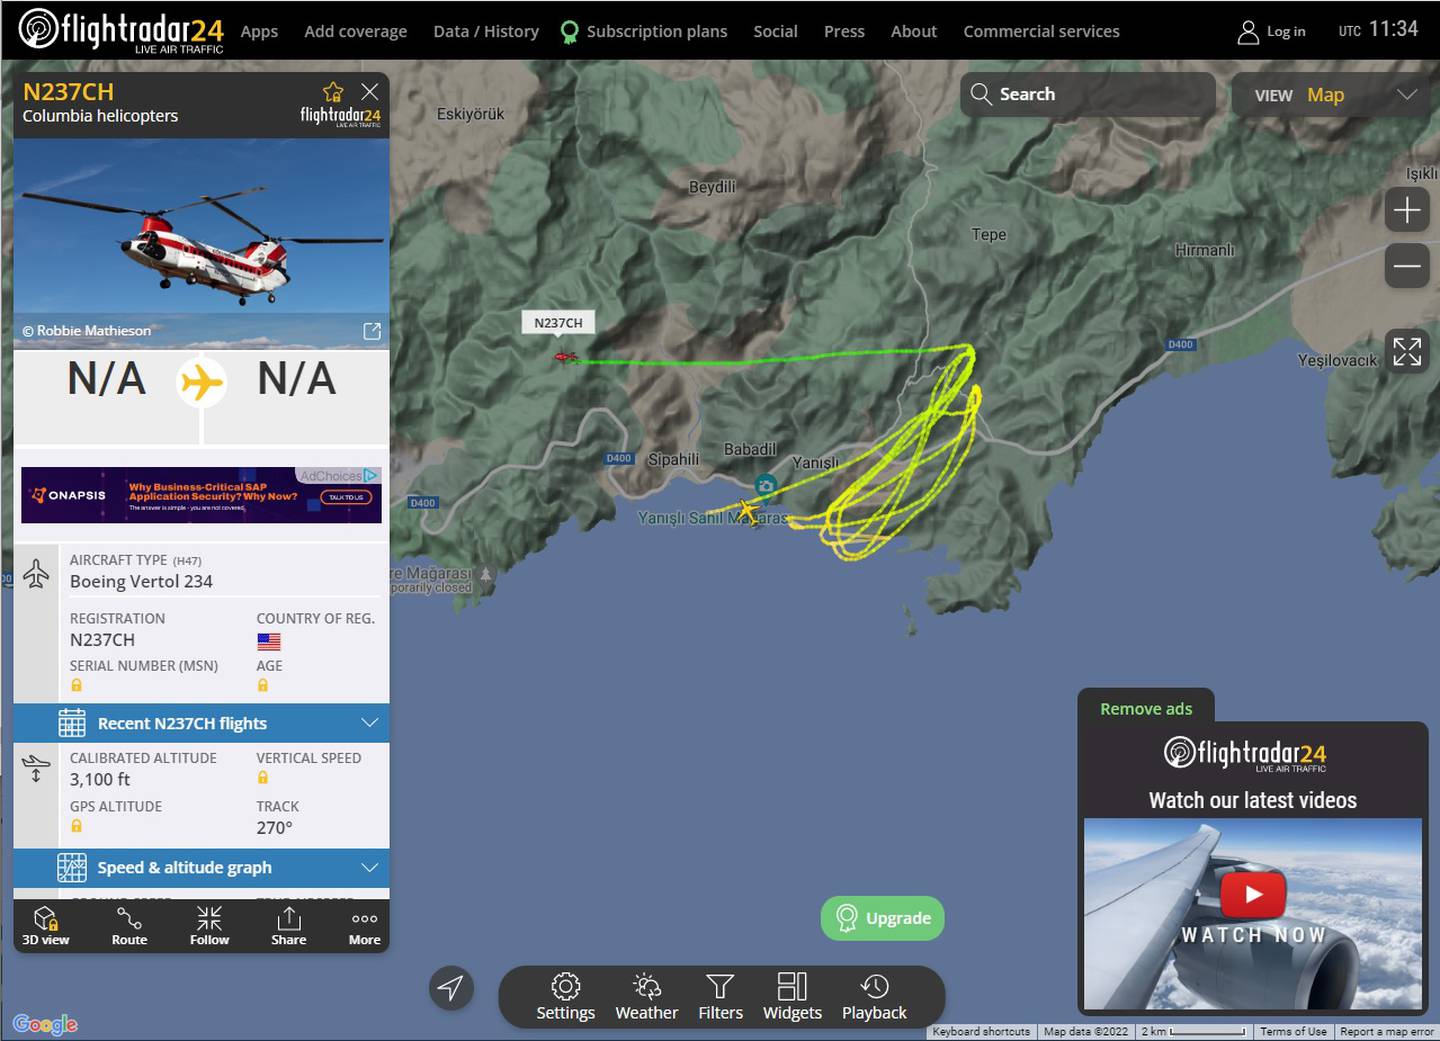 A Boeing Vertol 234 helicopter usually used in aerial firefighting in forest fires can be seen flying in circles close to the Akkuyu nuclear power plant. Photo via Flightradar24